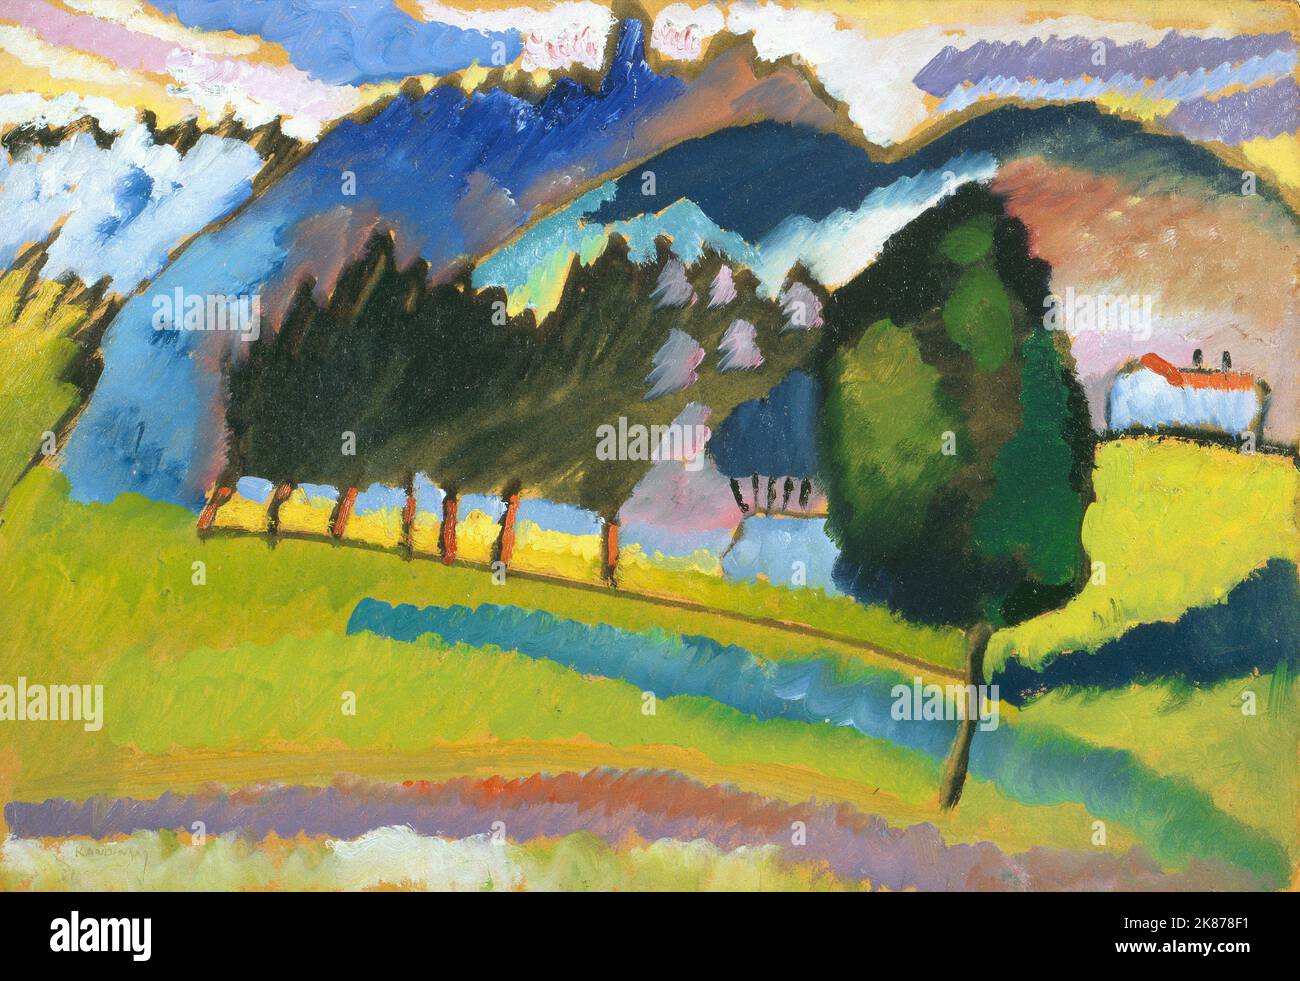 Landscape With Rolling Hills by Wassily Kandinsky 1910. Solomon Guggenheim Museum in New York, USA Stock Photo